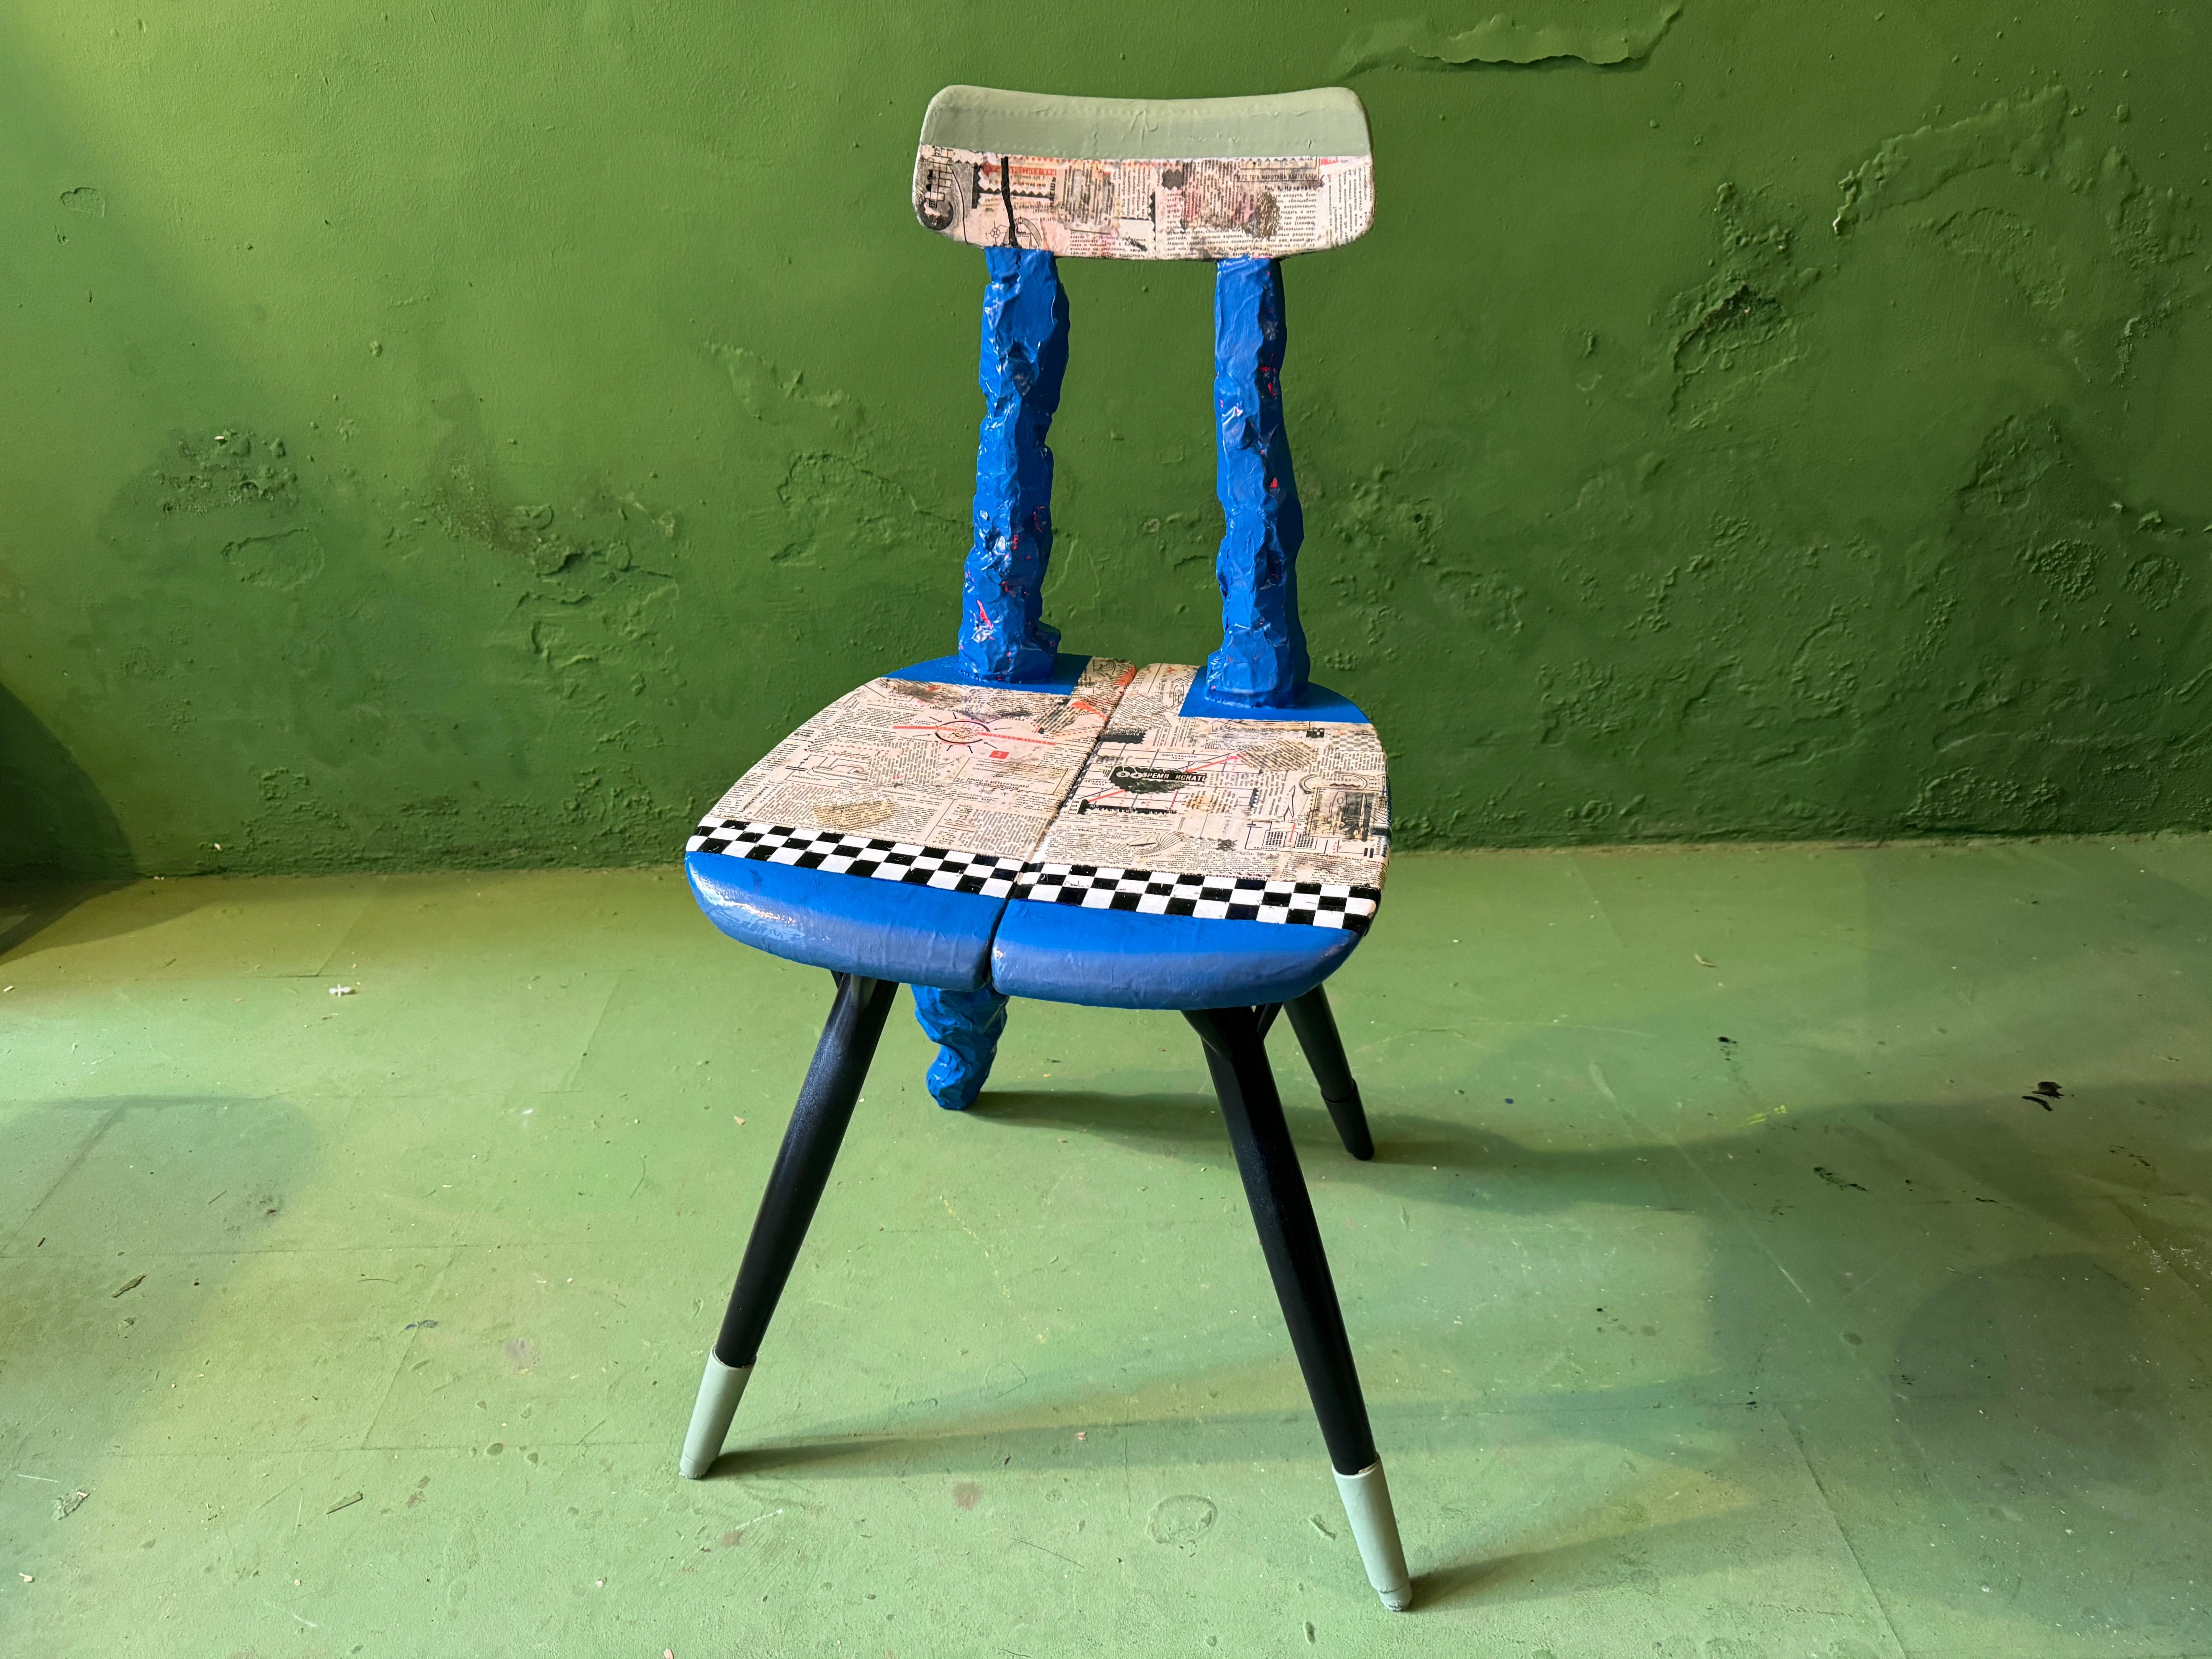 Ynve Ekströms famous chair re-visited with an artistic level never seen before. Paper mache, lacquere, color and old russian newspaper

Teak stool/ table, gold plated, painted, lacquered in hogh gloss, carved and backrest added. Original title